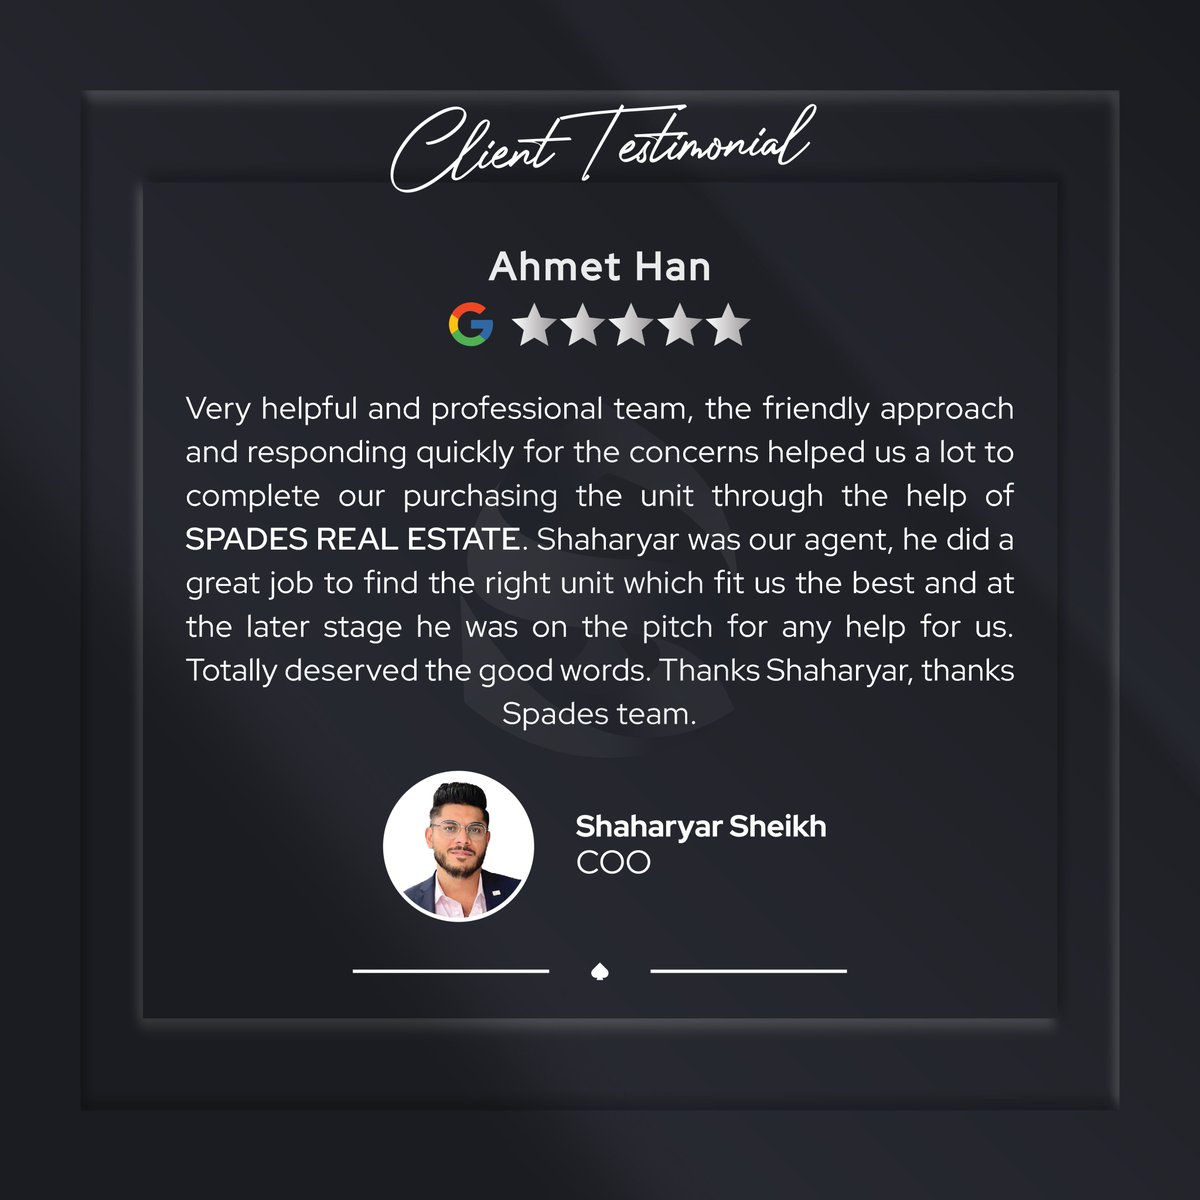 Mr. Shaharyar, COO of Spades Real Estate continues to set an example not only for the team, but also the industry.

Grateful to Mr. Ahmet Han for placing trust in Team Spades for your real estate ventures in the UAE!

#spadesre #clienttestimonial #happyclients #5starreview #Dubai